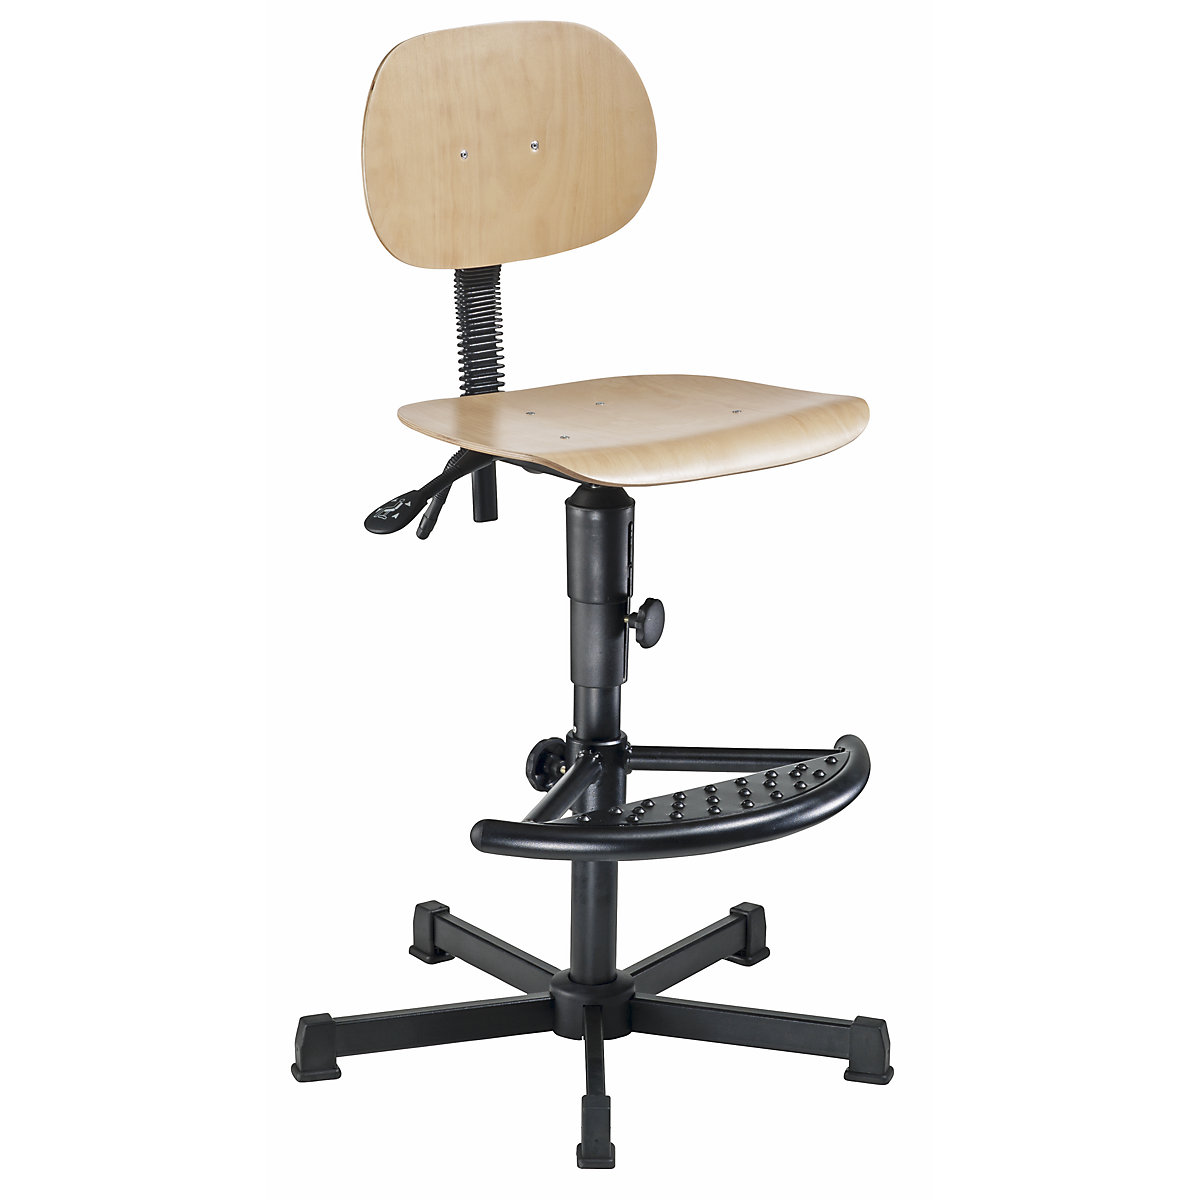 Industrial swivel chair, manual height adjustment - meychair